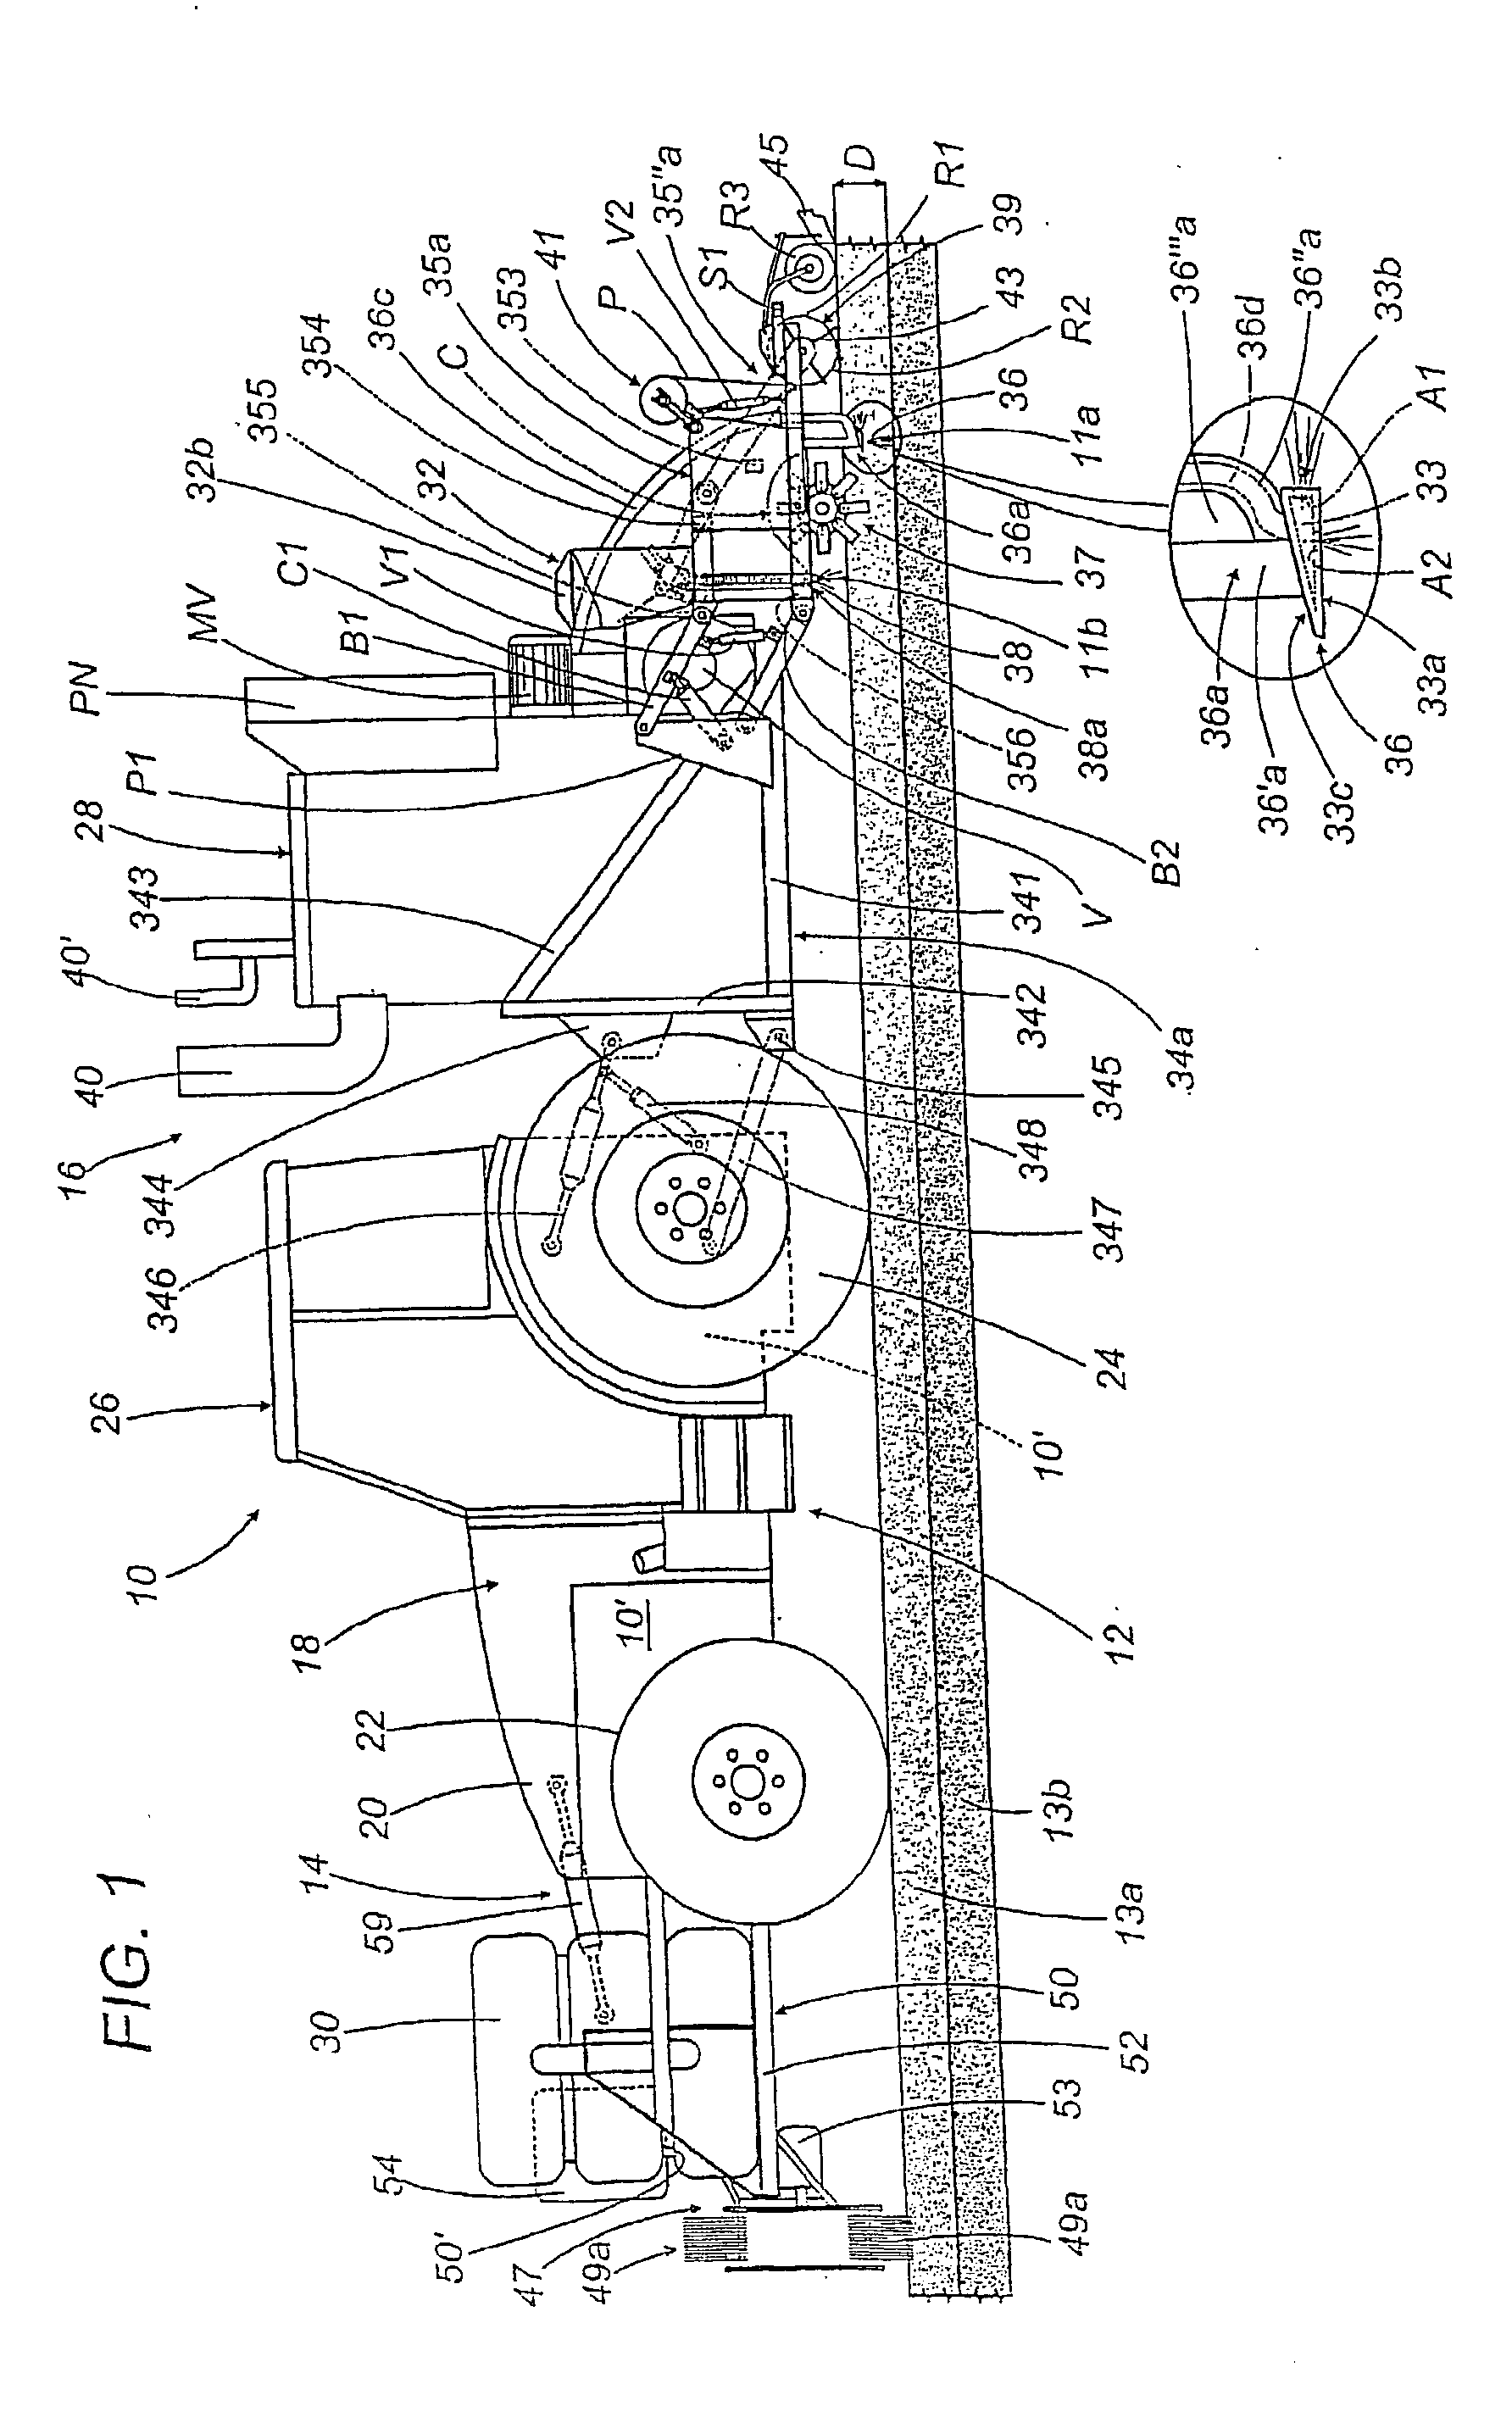 Apparatuses and methods for sterilizing soil